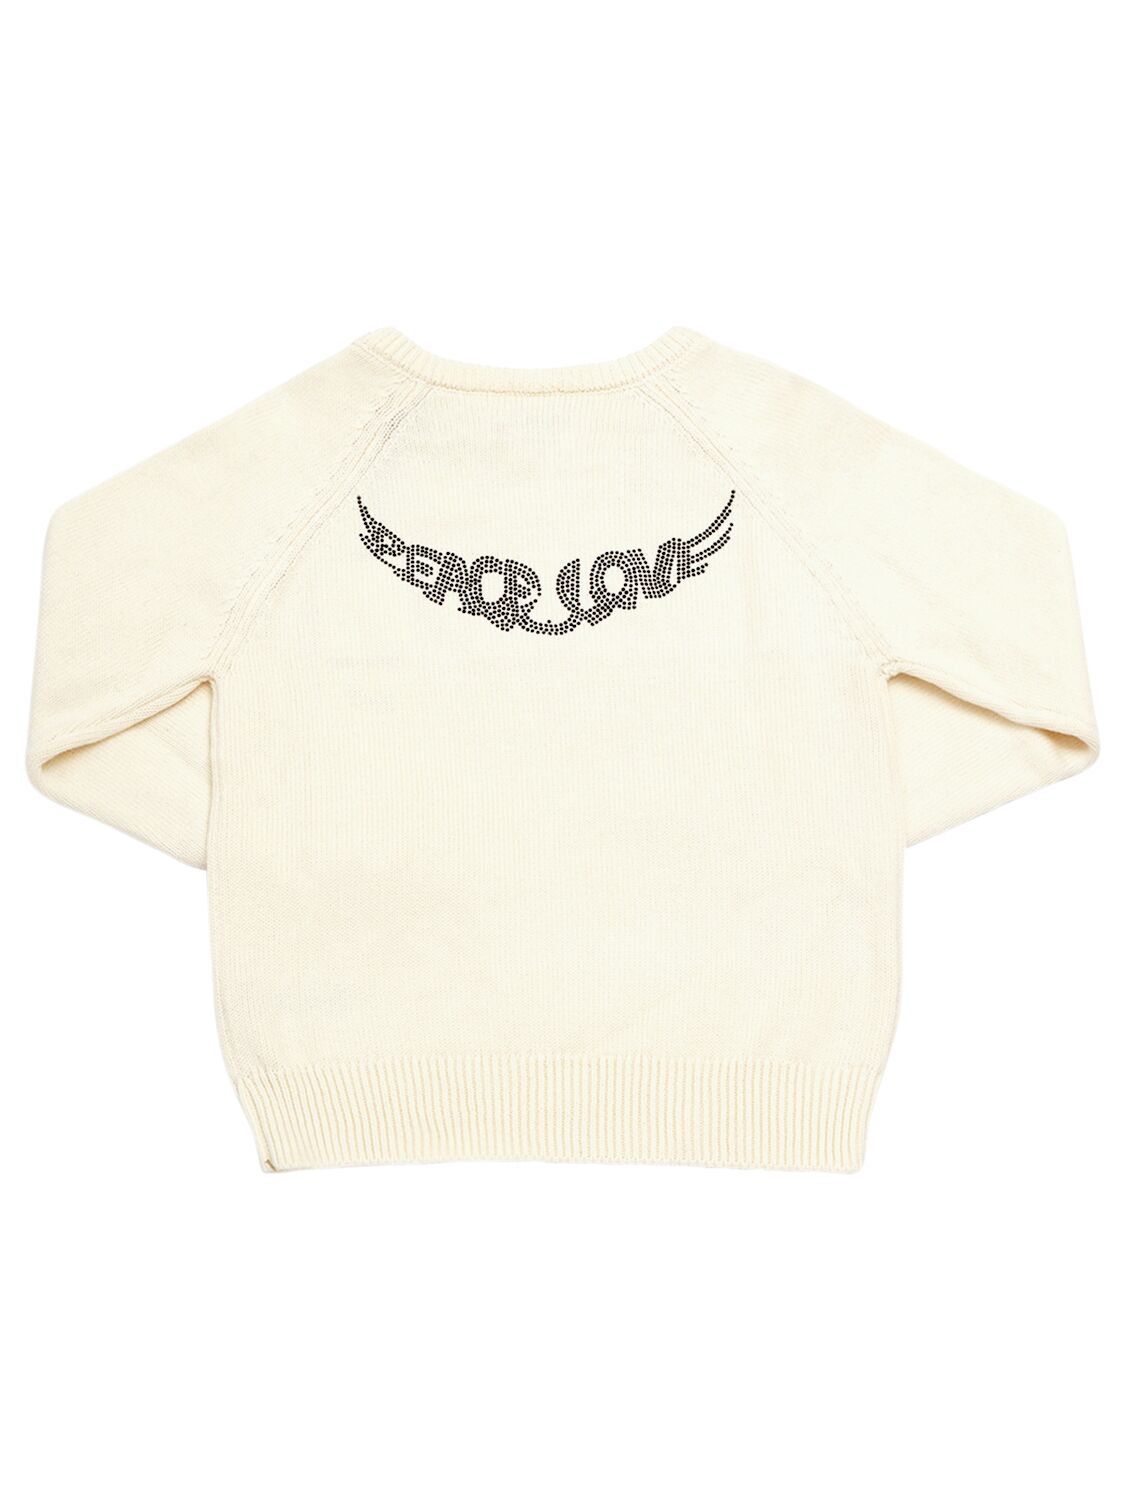 Shop Zadig & Voltaire Embellished Cotton Knit Sweater In Off-white